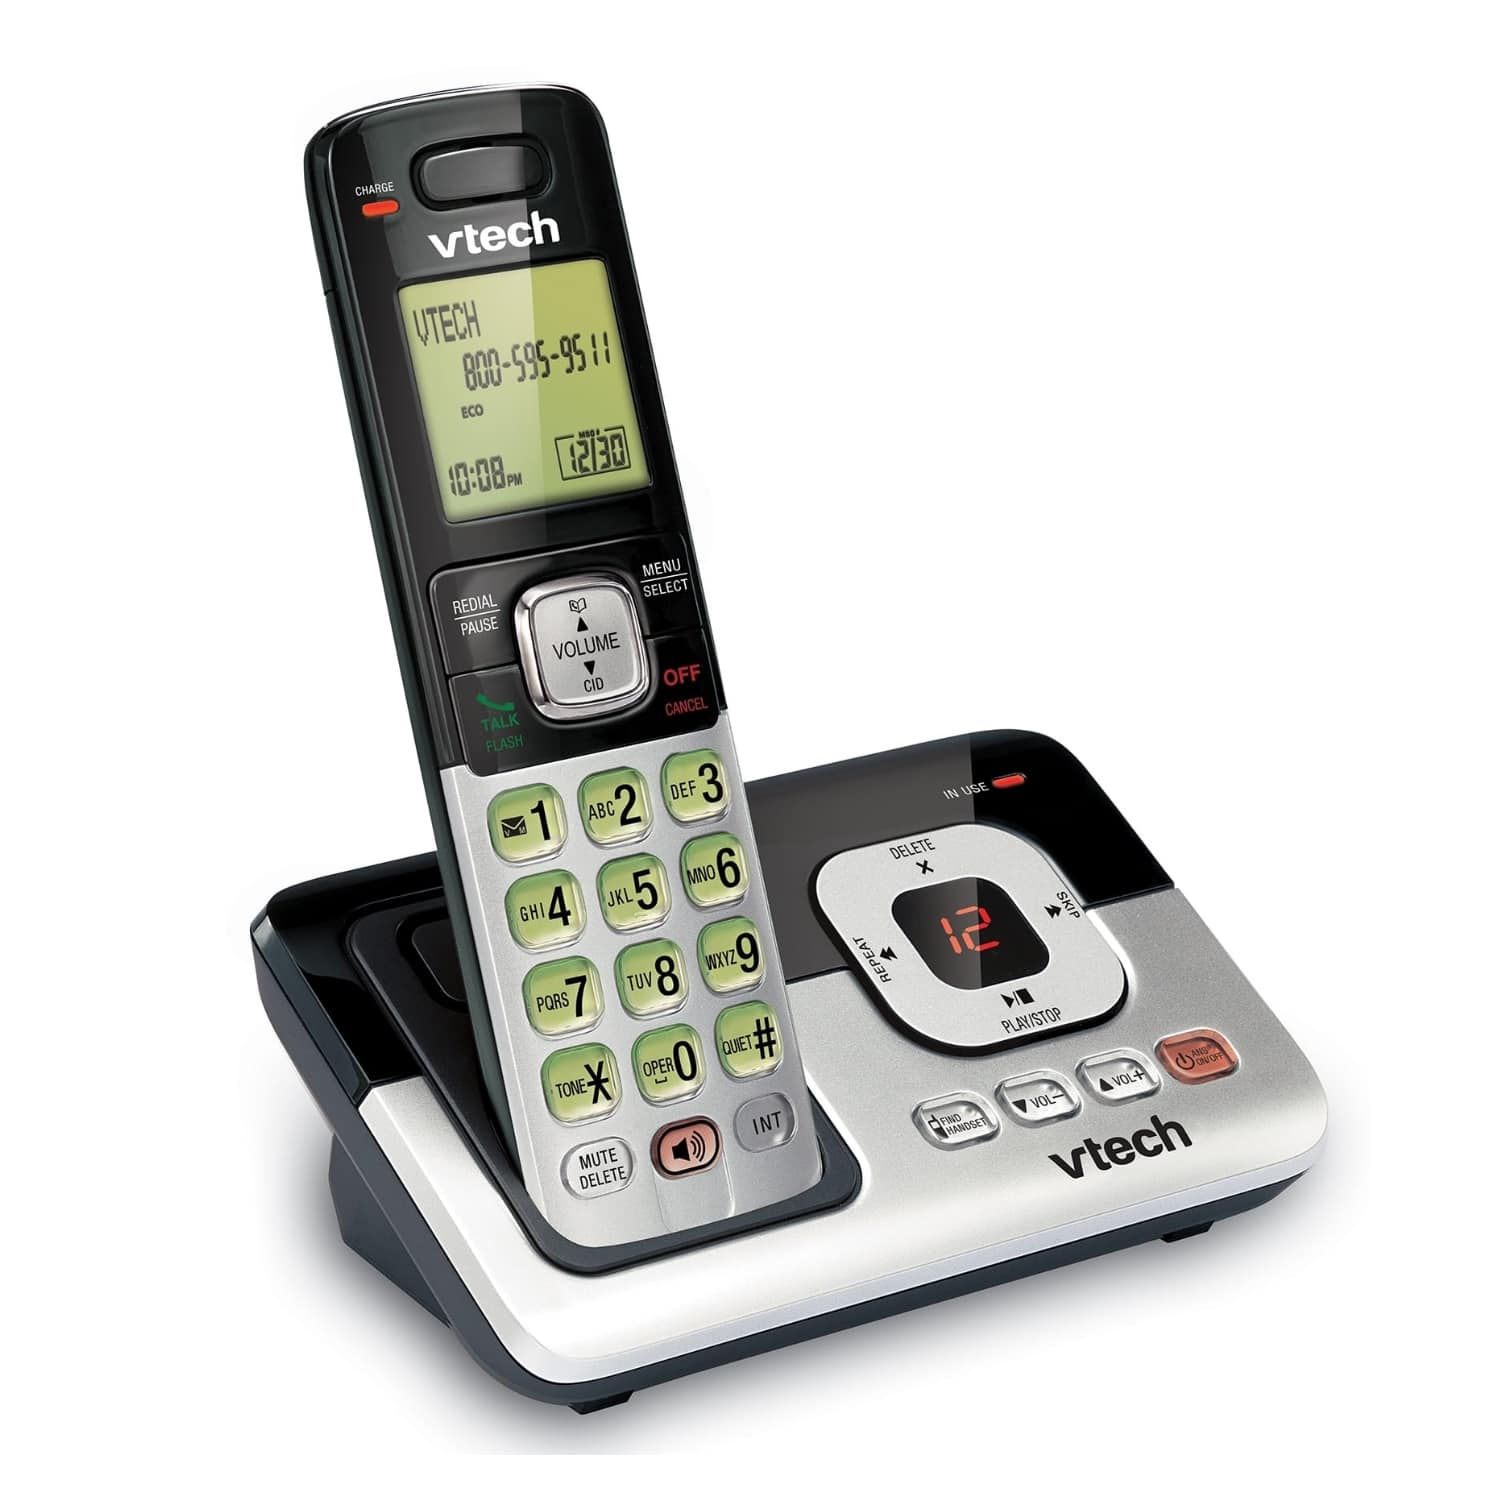 Backlit Display VTech CS6829 Expandable Cordless Answering System with Caller ID DECT 6.0